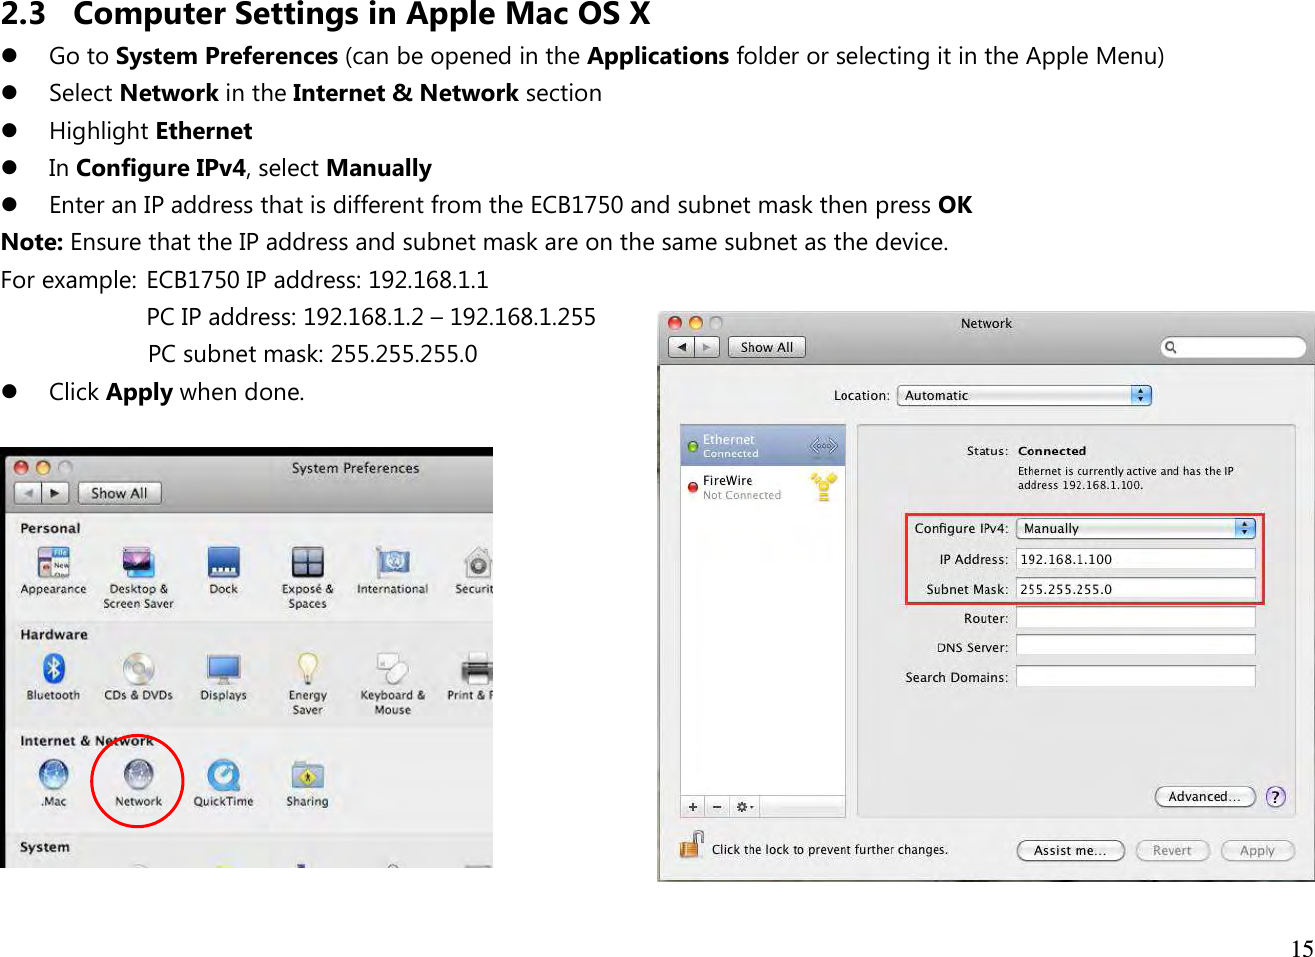  15  2.3 Computer Settings in Apple Mac OS X  Go to System Preferences (can be opened in the Applications folder or selecting it in the Apple Menu)  Select Network in the Internet &amp; Network section  Highlight Ethernet  In Configure IPv4, select Manually  Enter an IP address that is different from the ECB1750 and subnet mask then press OK Note: Ensure that the IP address and subnet mask are on the same subnet as the device.   For example:  ECB1750 IP address: 192.168.1.1 PC IP address: 192.168.1.2 – 192.168.1.255   PC subnet mask: 255.255.255.0  Click Apply when done.   